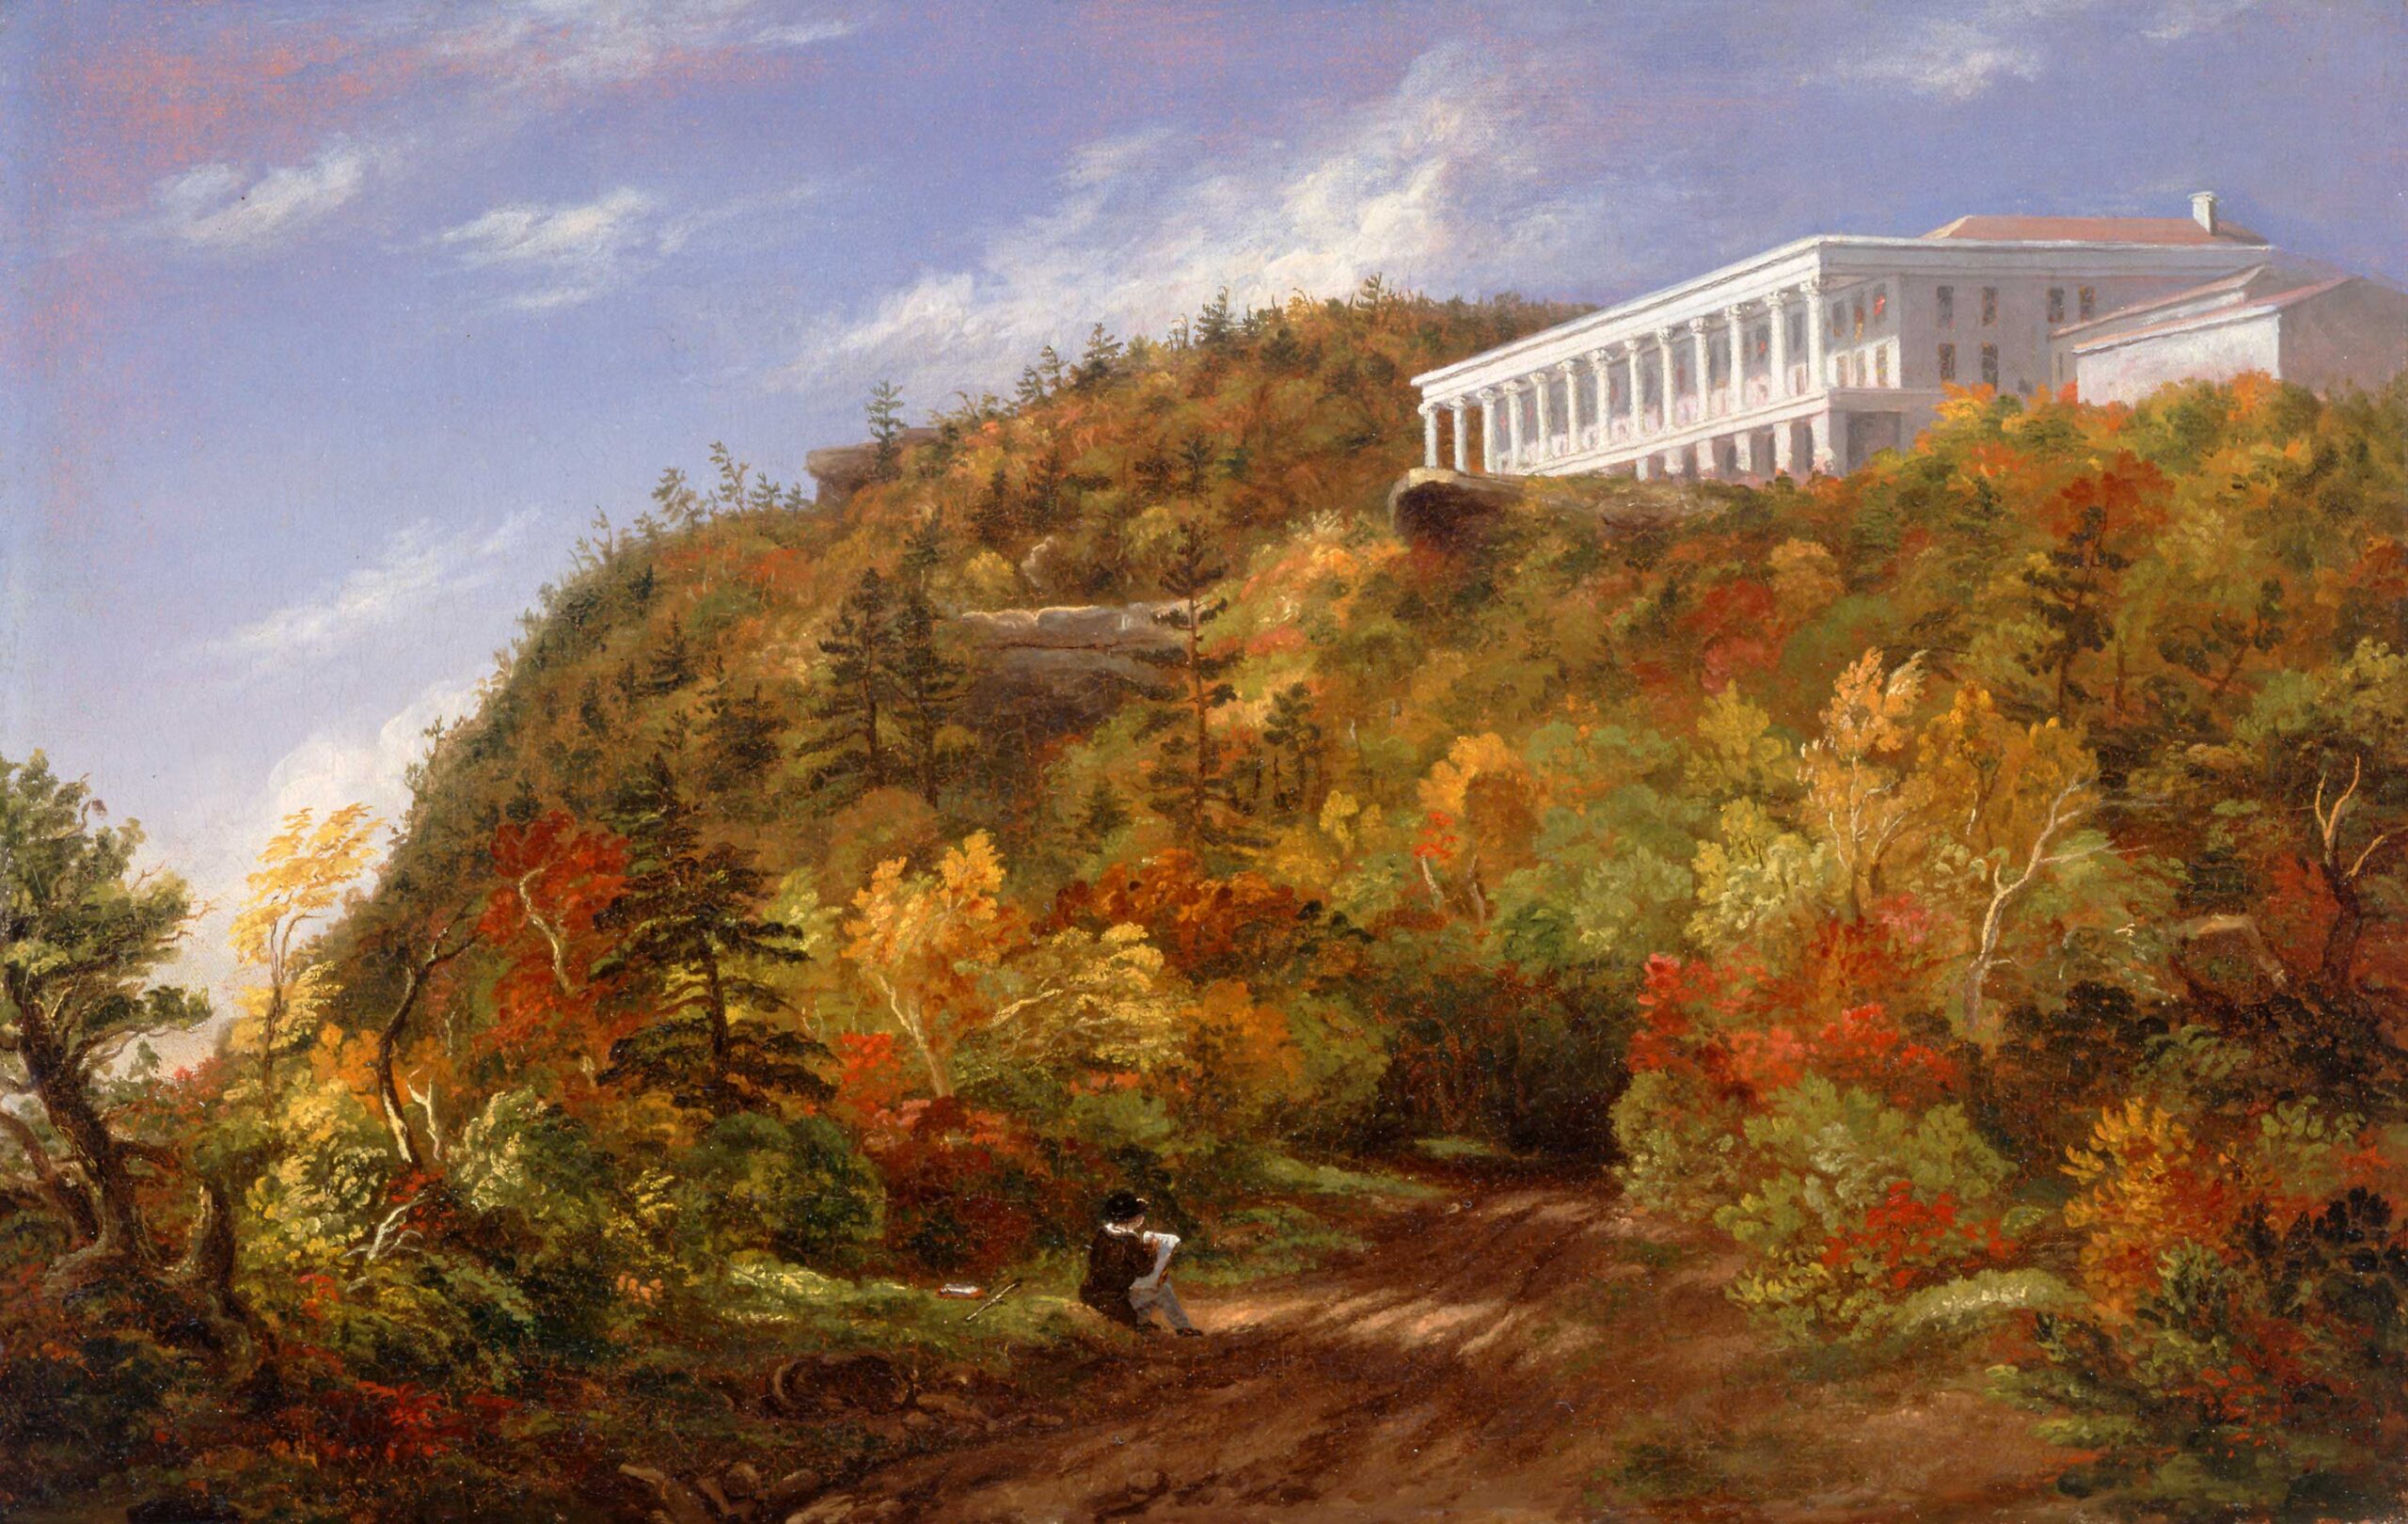 Sarah Cole, "A View of the Catskill Mountain House," 1848, oil on canvas, 15 1/3 x 23 3/8 in., 22 ¼ x 29 ¾ in. framed, Albany Institute of History and Art, Albany, NY, Albany Institute of History & Art Purchase, 1964.40